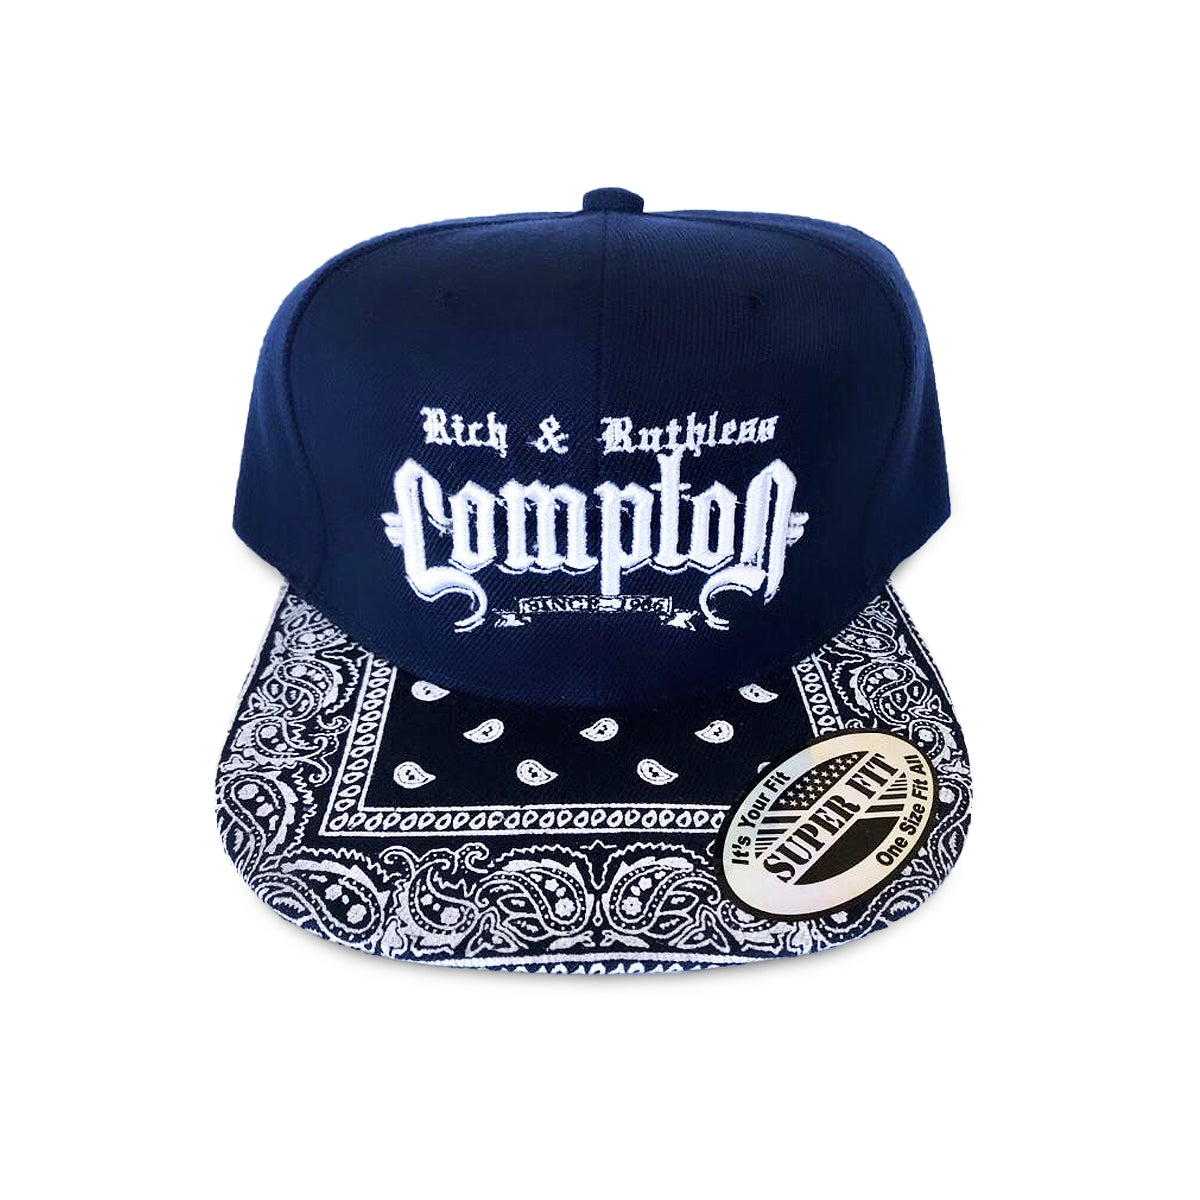 Rich & Ruthless Compton Since 1986 (Snapback Navy Paisley)